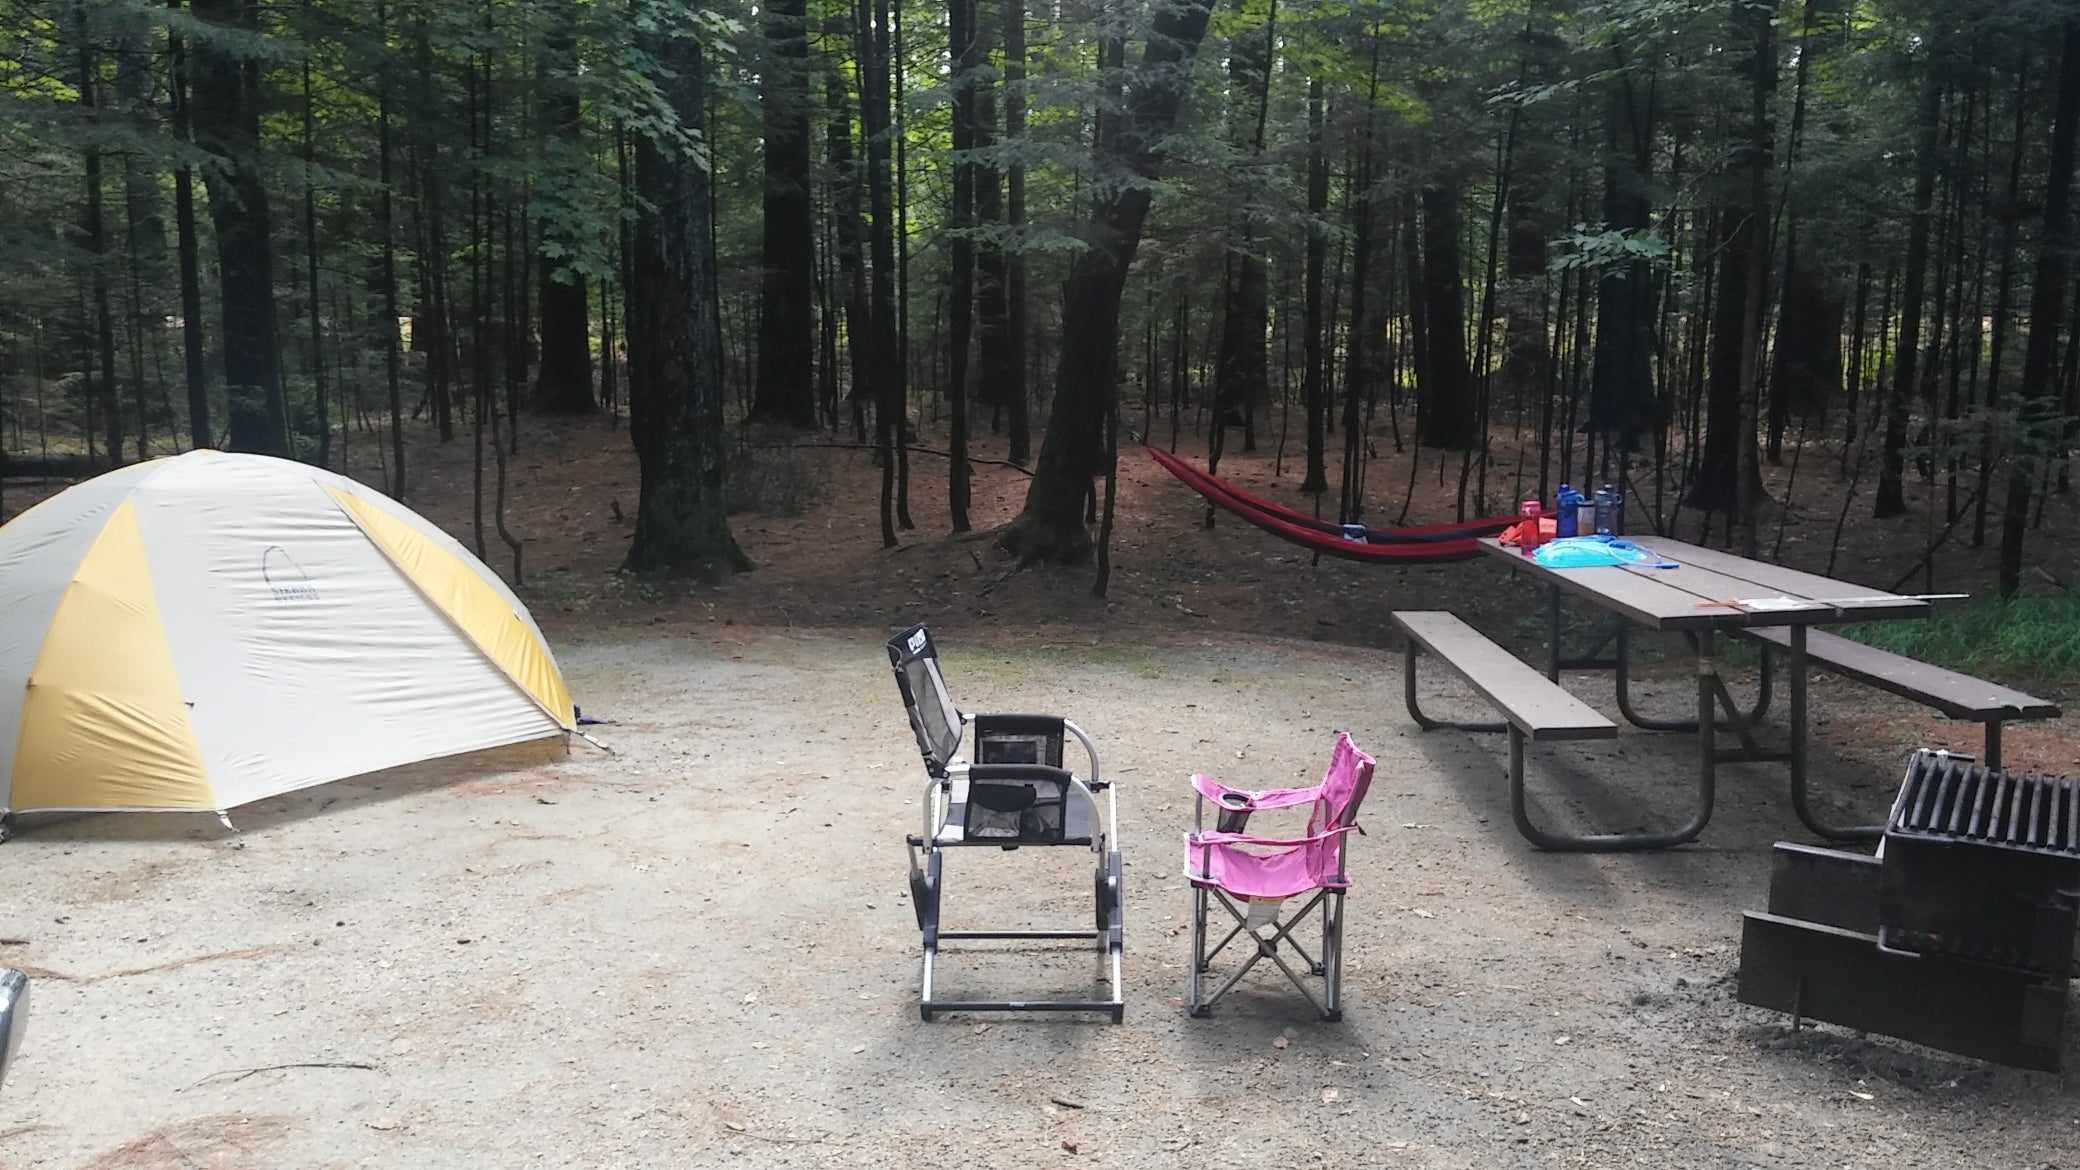 Camper submitted image from Passaconaway Campground - 4